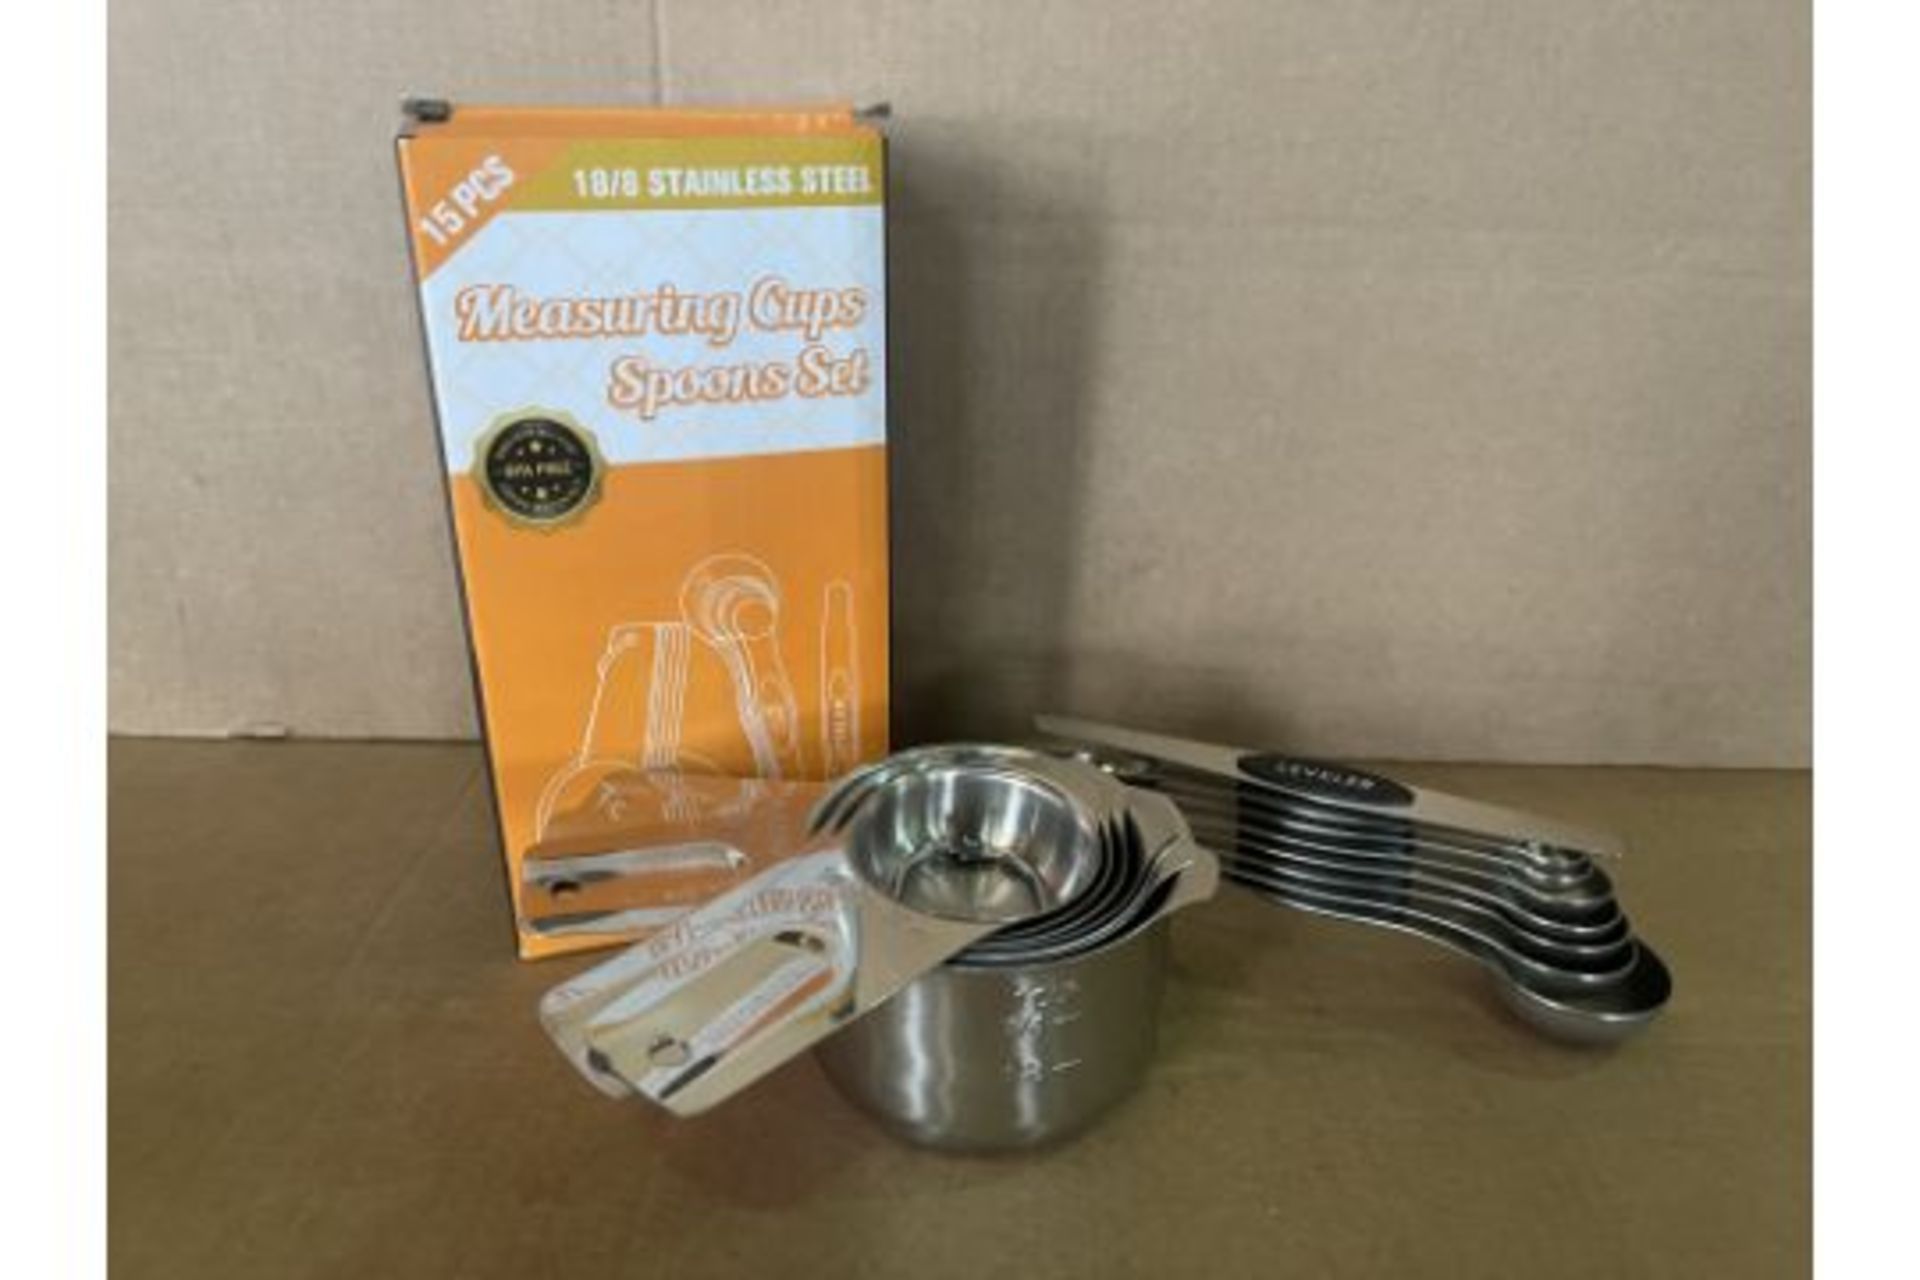 15 X BRAND NEW 15 PIECE STAINLESS STEEL MEASURING CUP AND SPOON SETS BPA FREE R15